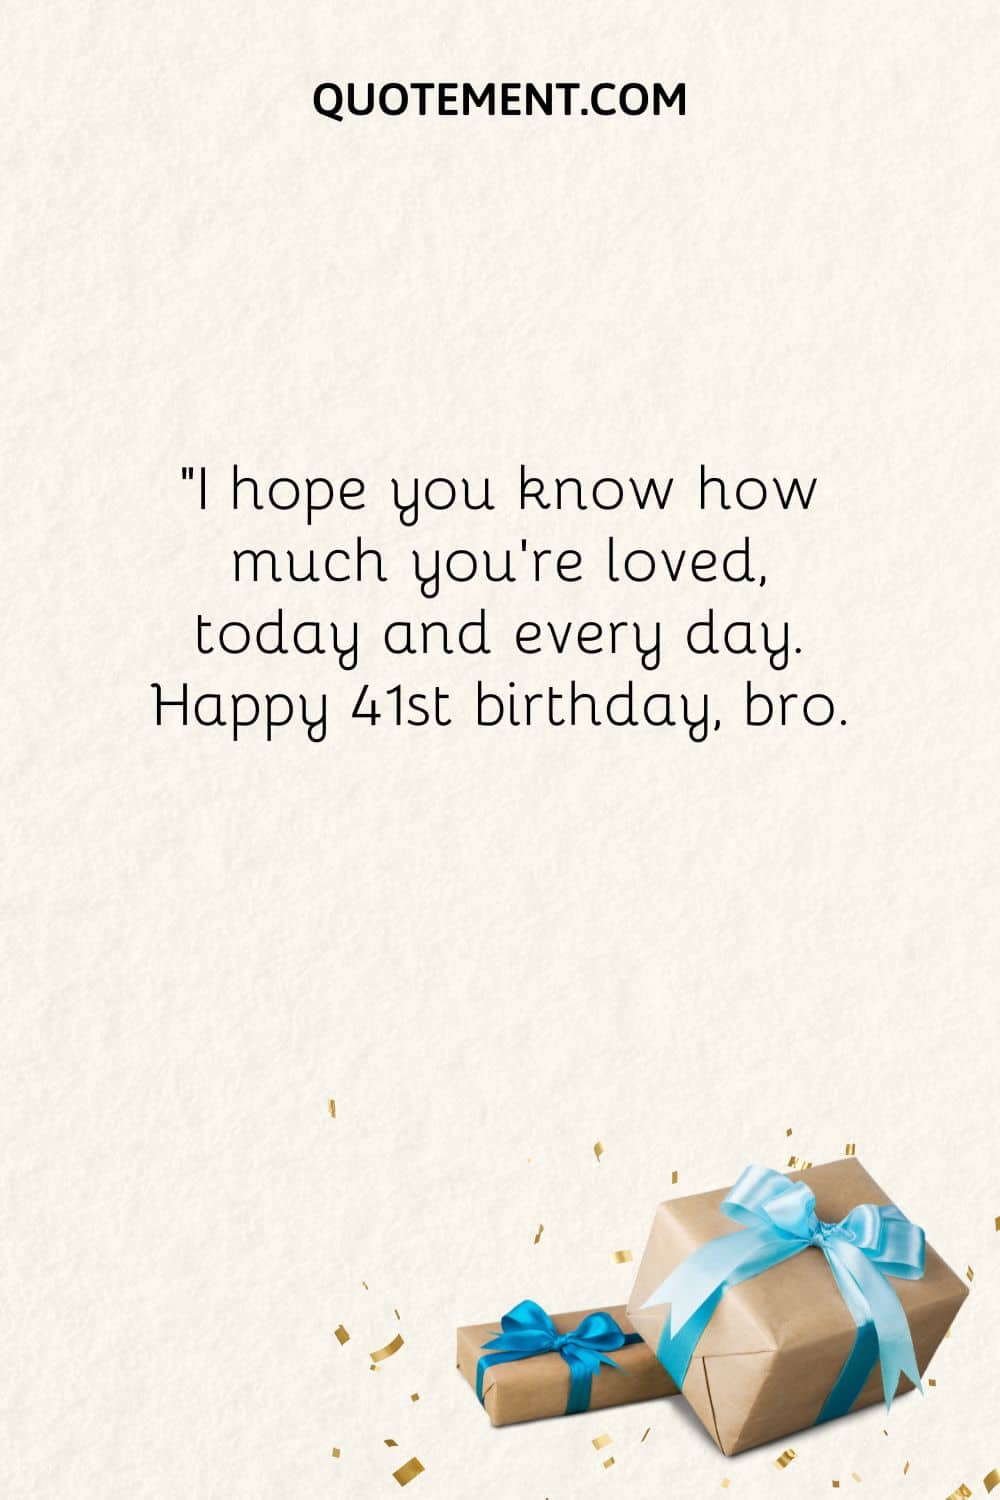 I hope you know how much you’re loved, today and every day. Happy 41st birthday, bro